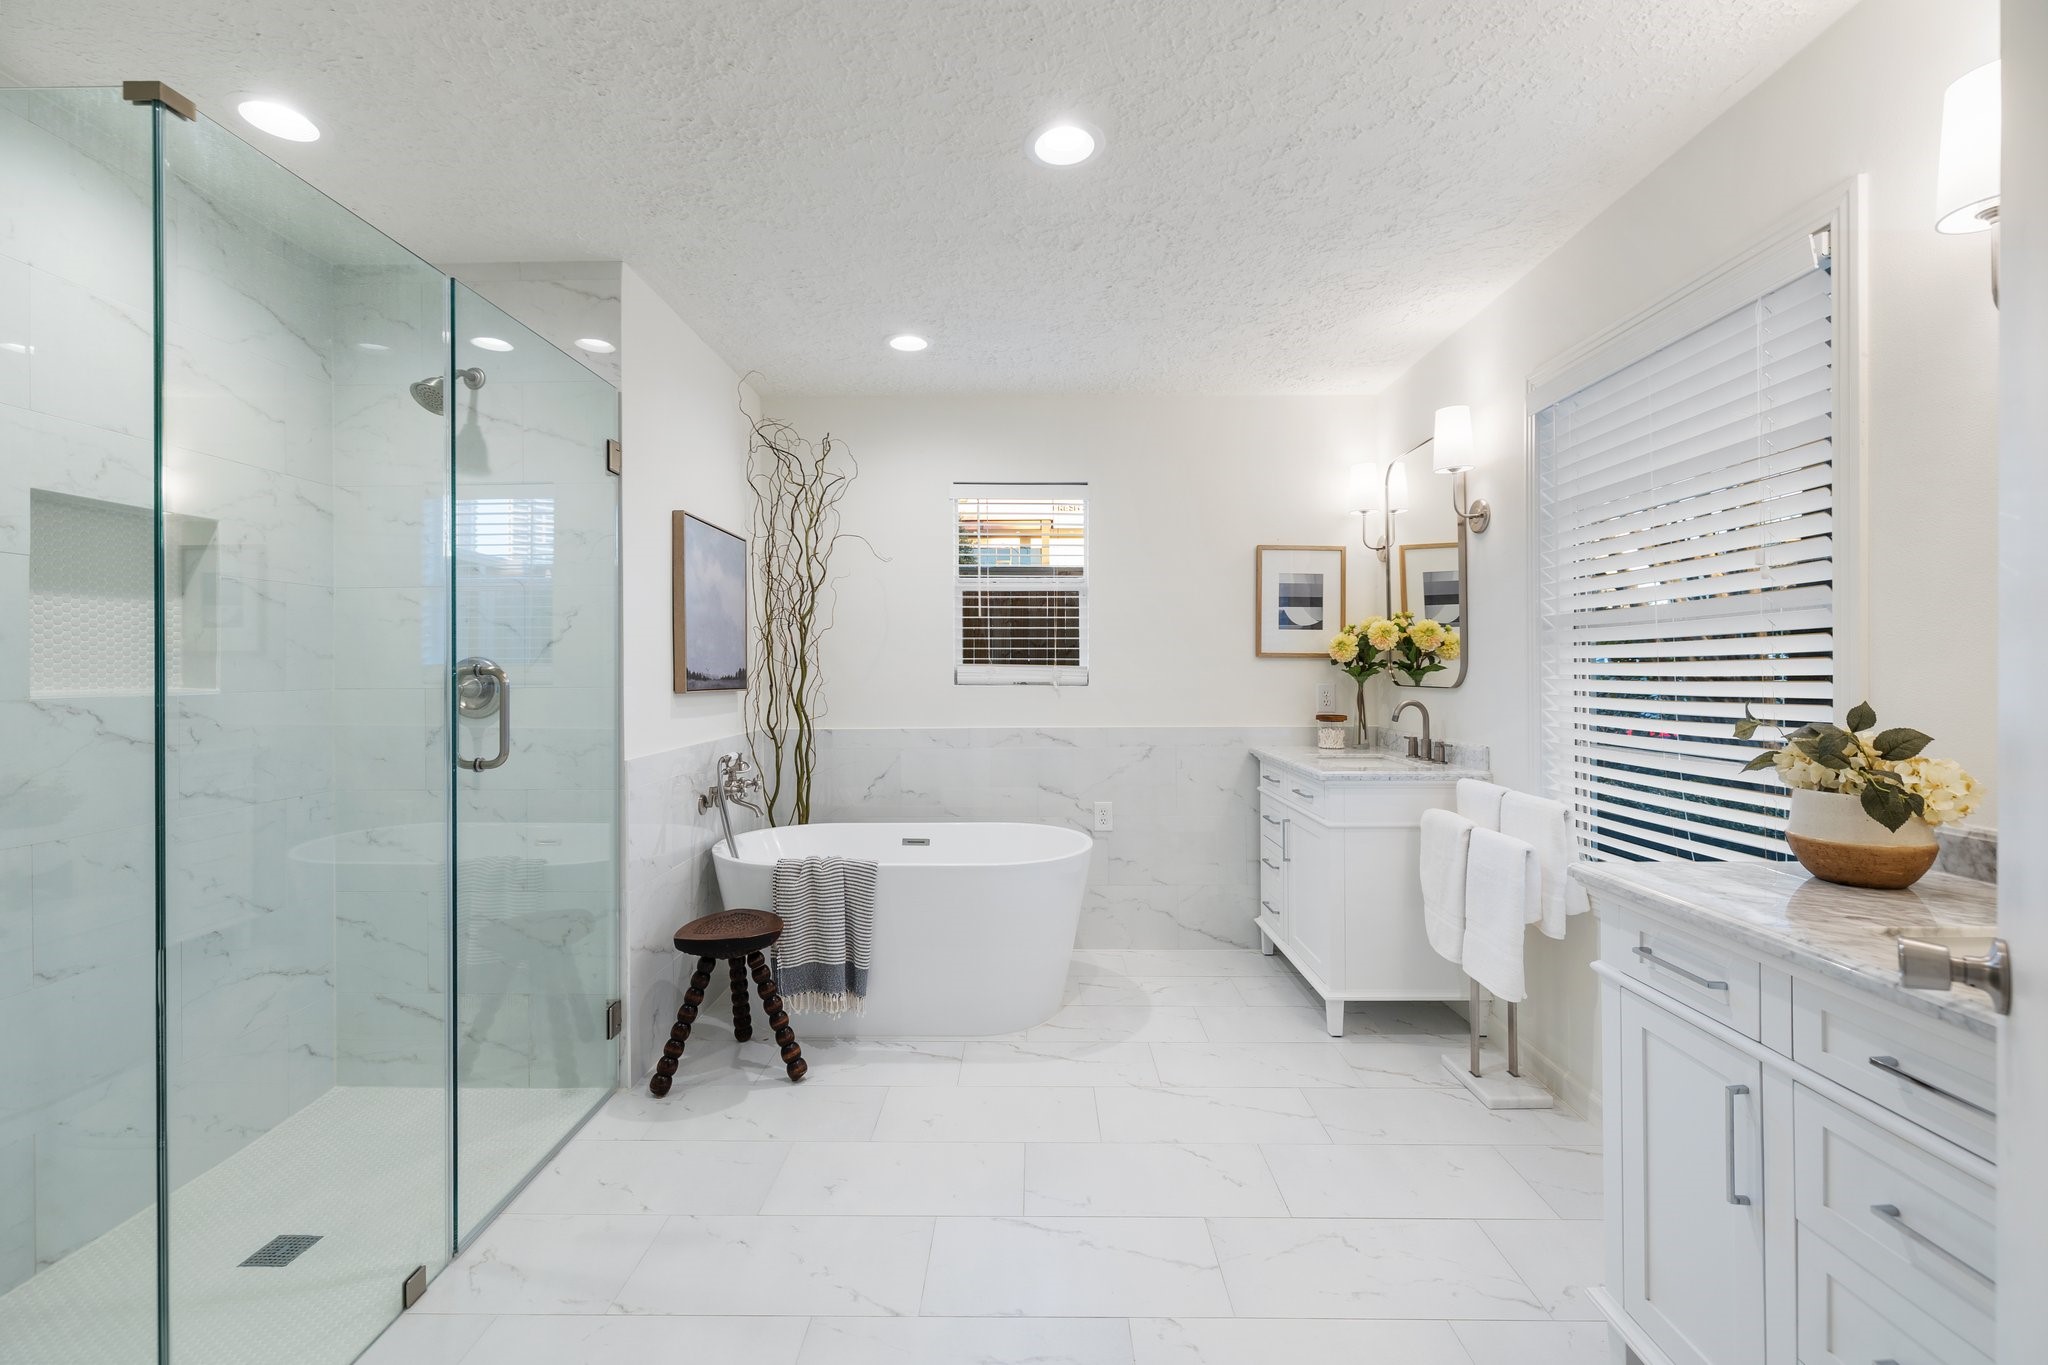 The master bath has undergone a substantial transformation, featuring a soaking tub, a glass-framed shower with a custom niche, dual marble vanities, custom sconces, mirrors, brushed nickel faucets, and exquisite tile flooring.